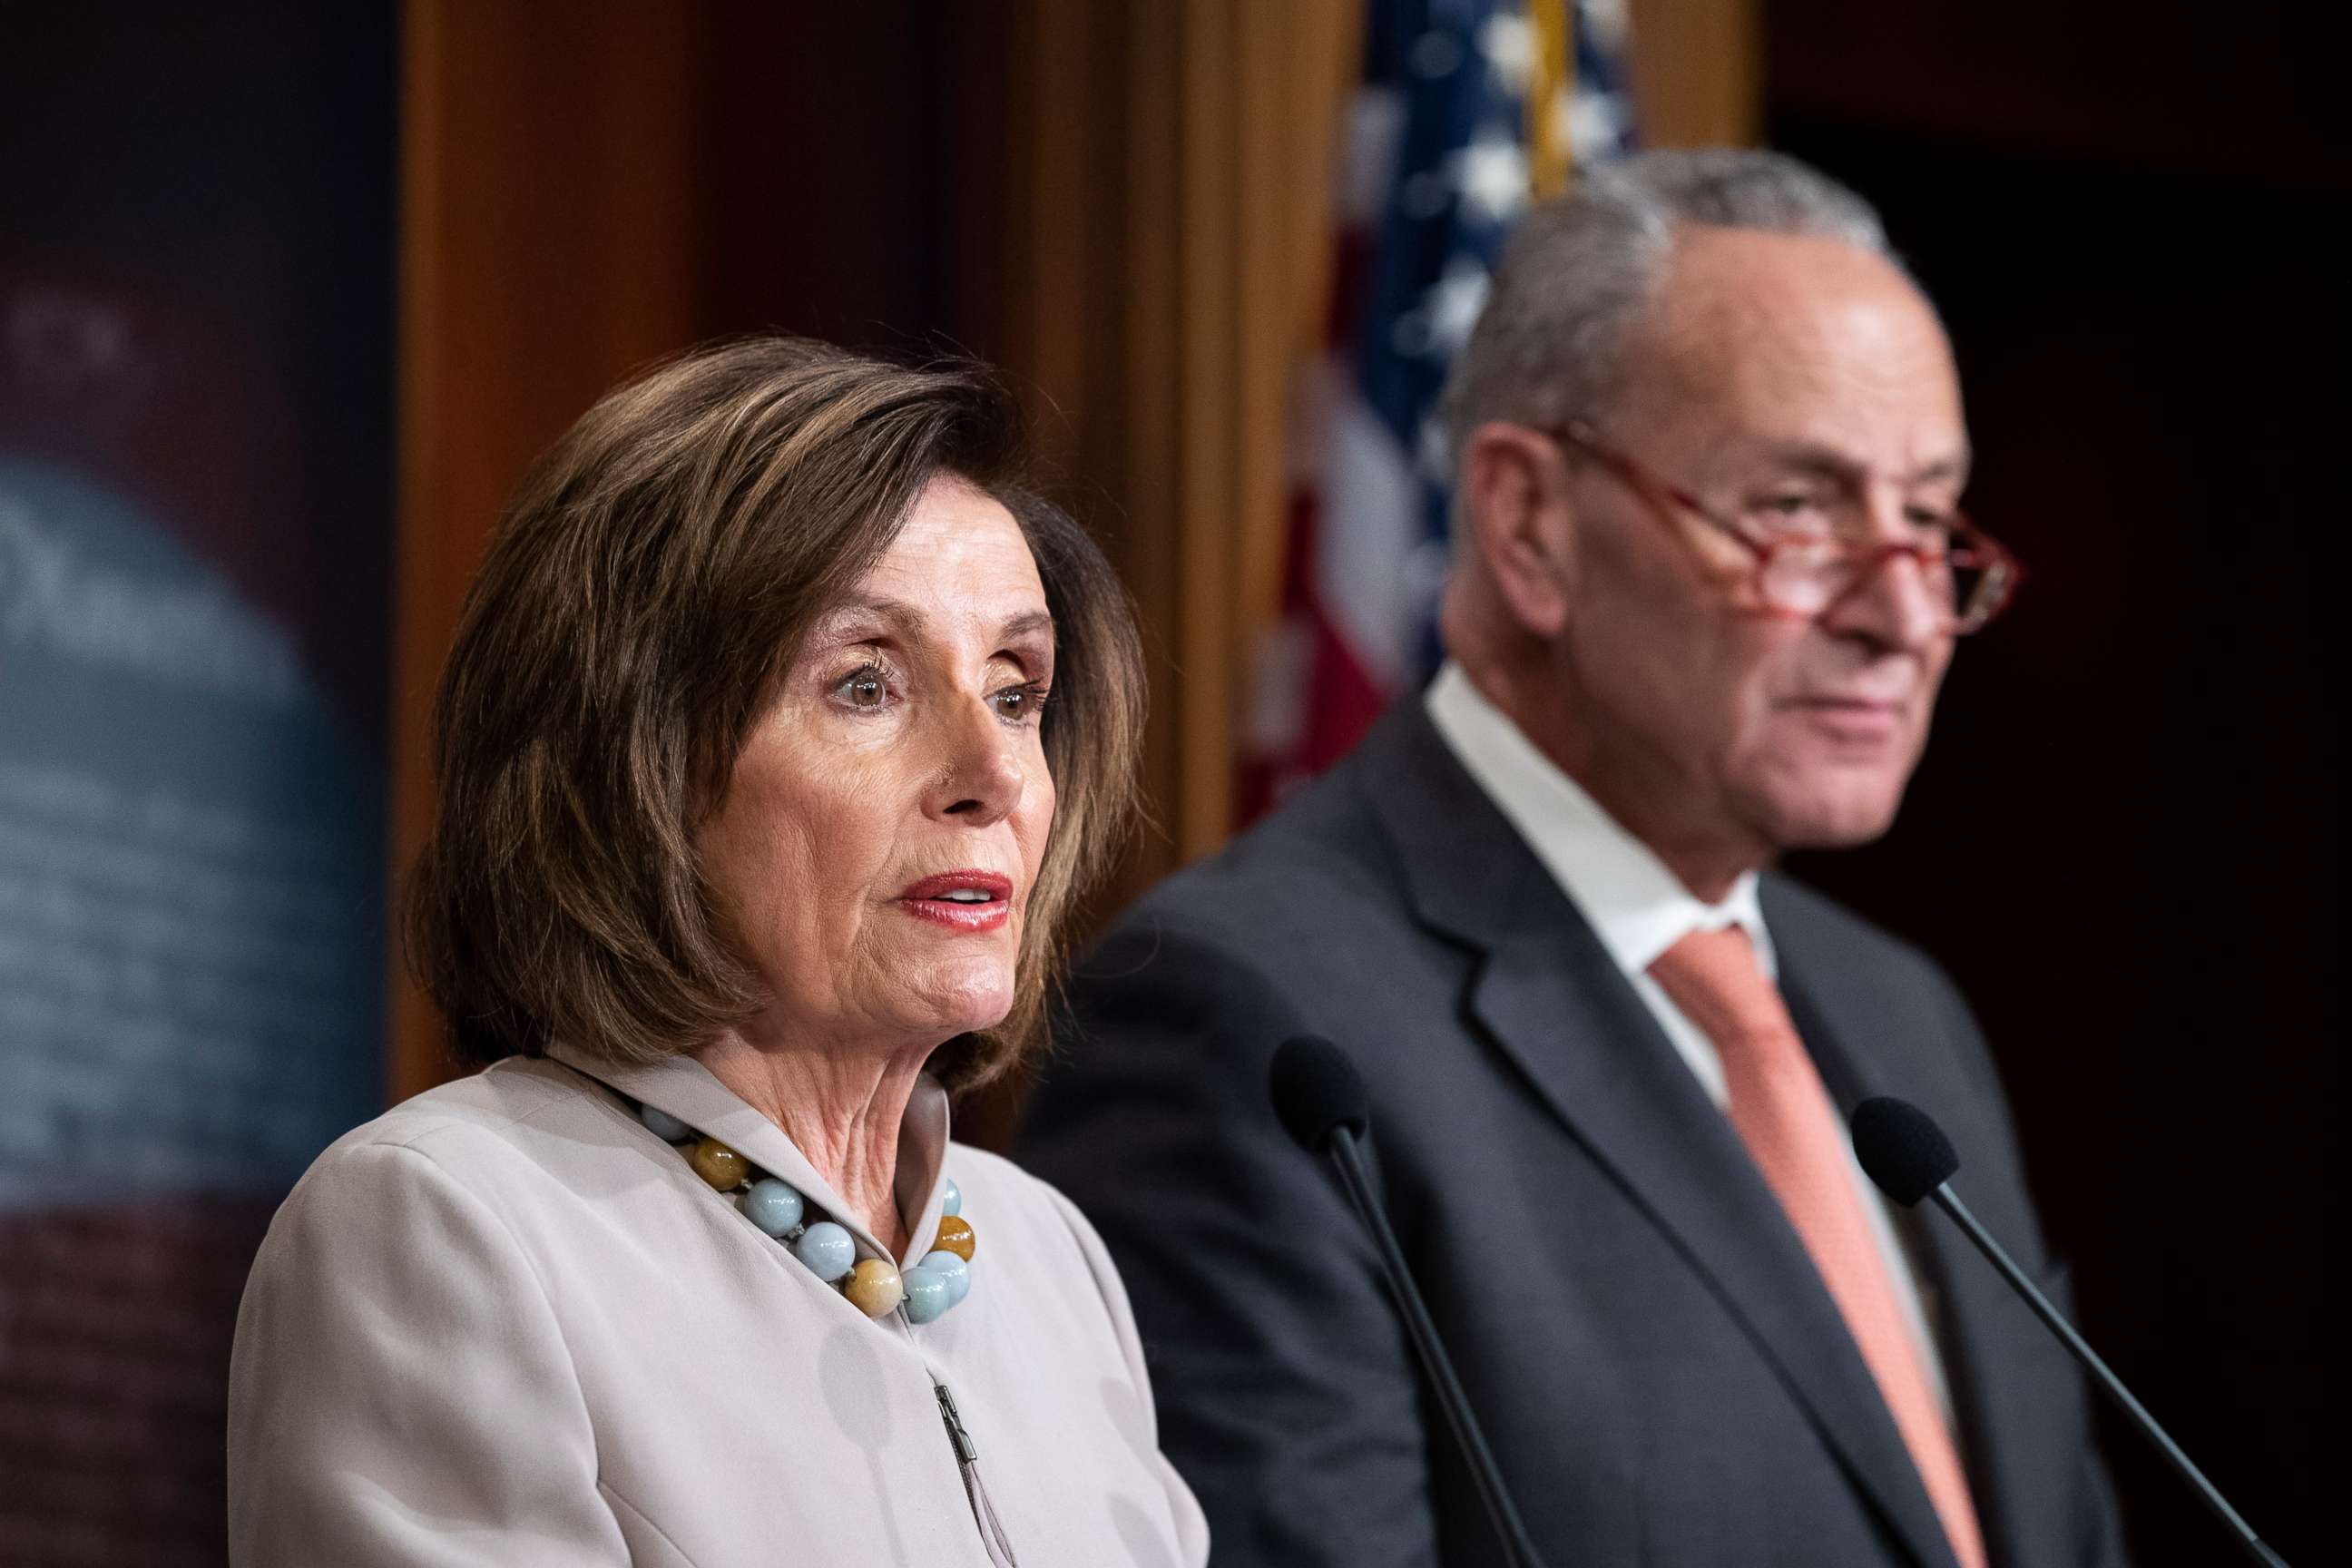 PHOTO: In this Tuesday, Feb. 11, 2020, image, Nancy Pelosi and Chuck Schumer speak during a news conference, on Capitol Hill, in Washington.